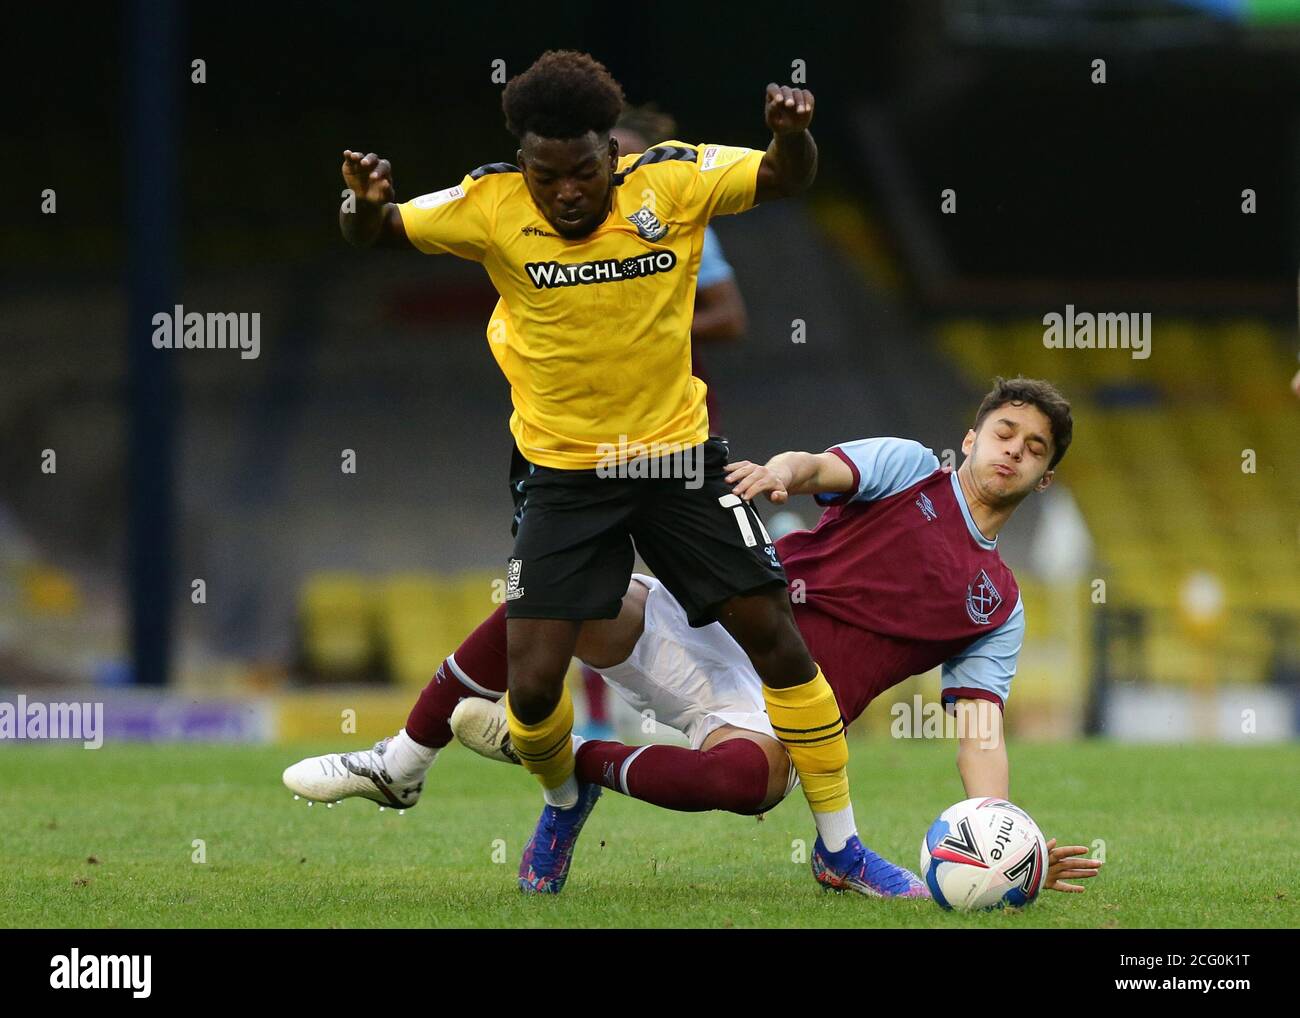 SOUTHEND ON SEA, ENGLAND. SEPTEMBER 8TH Terrell Egbri of Southend United battling for possession with Bernado Rosa of West Ham United during the EFL Trophy match between Southend United and West Ham United at Roots Hall, Southend. (Credit: Jacques Feeney | MI News) Credit: MI News & Sport /Alamy Live News Stock Photo